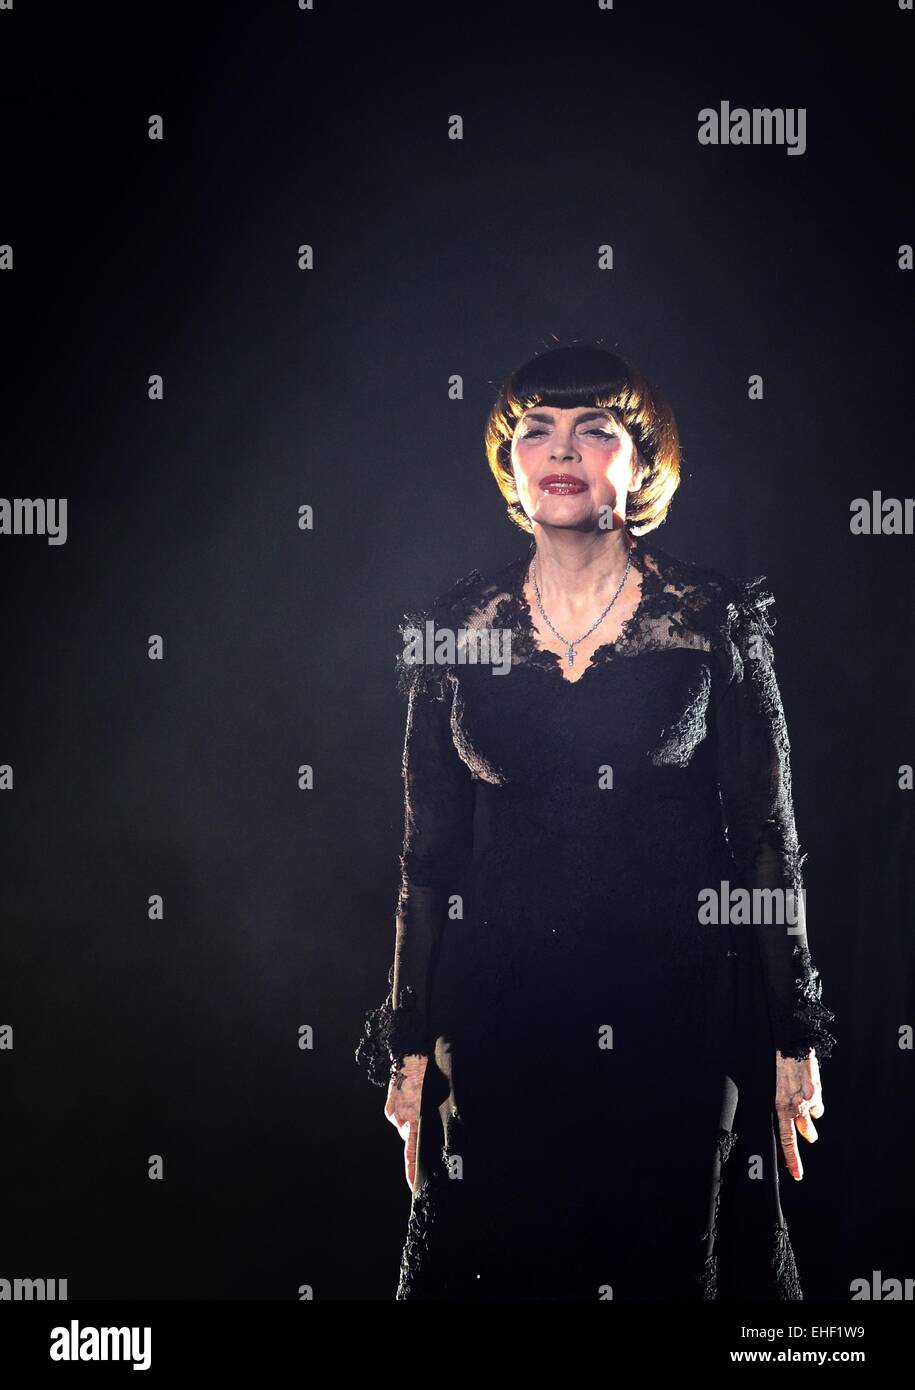 Fuessen, Germany. 12th Mar, 2015. French singer Mireille Mathieu performs on stage as part of her tour celebrating her 50th stage anniversary at the Festspielhaus concert venue in Fuessen, Germany, 12 March 2015. Photo: Karl-Josef Hildenbrand /dpa/Alamy Live News Stock Photo